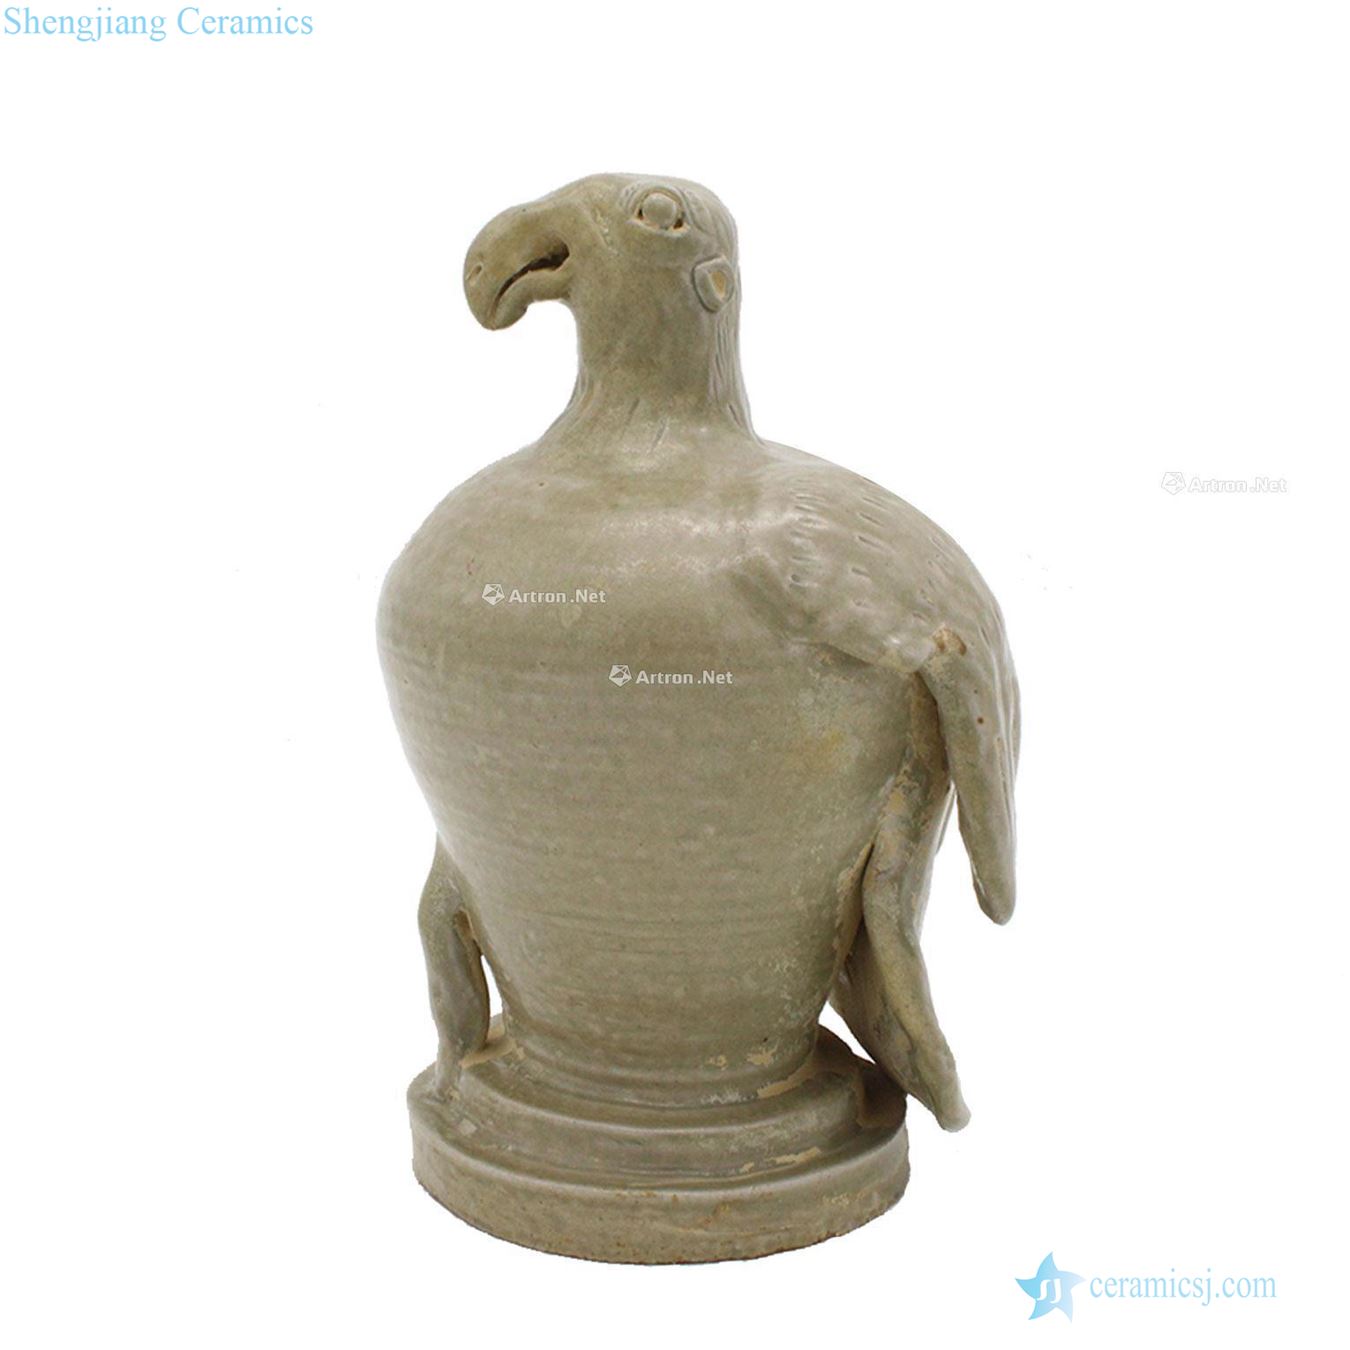 The kiln porcelain carving furnishing articles the eagles